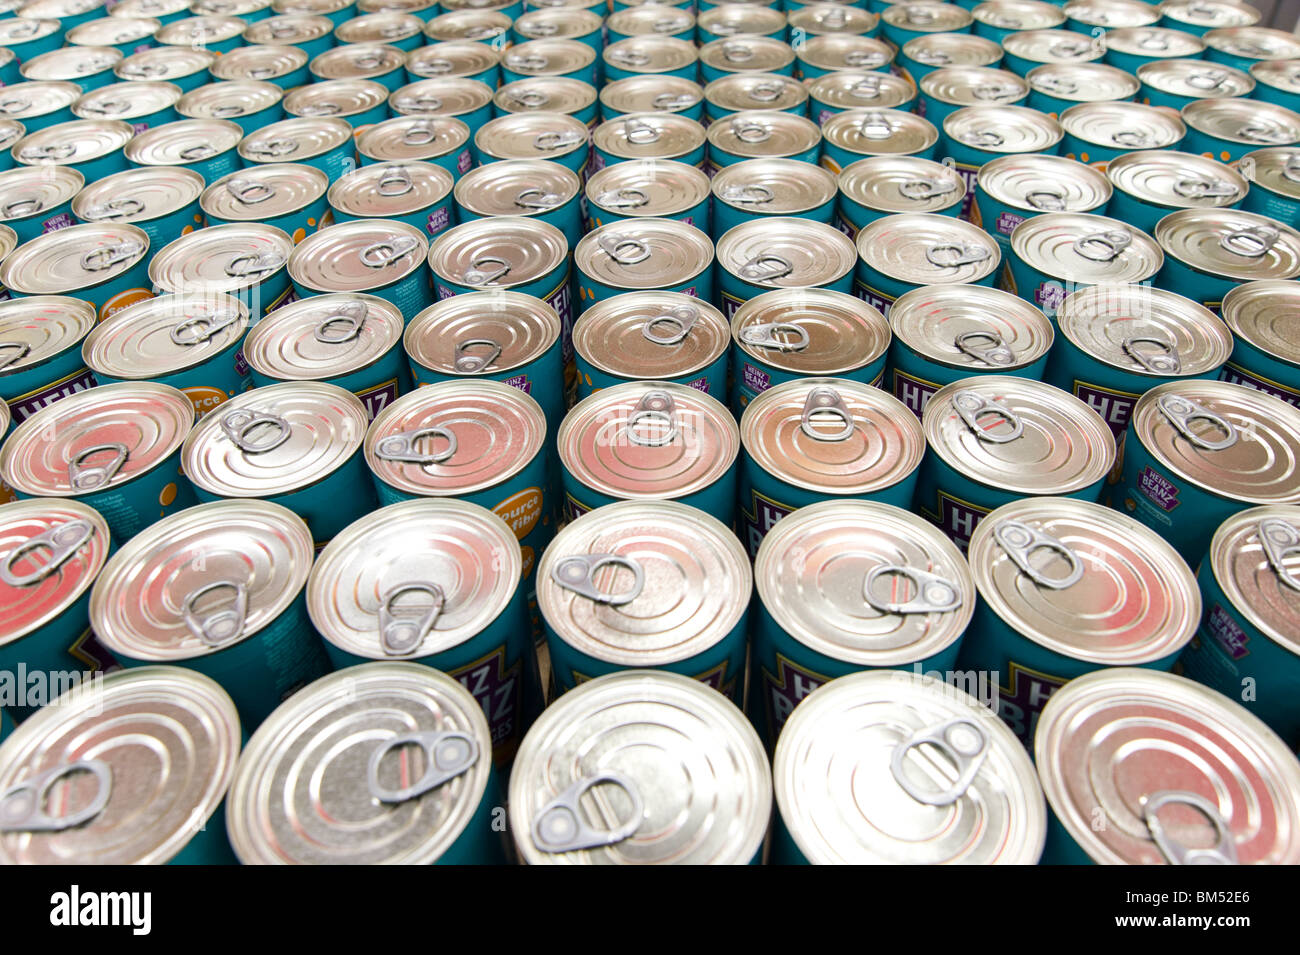 Rows of tinned food, UK Stock Photo